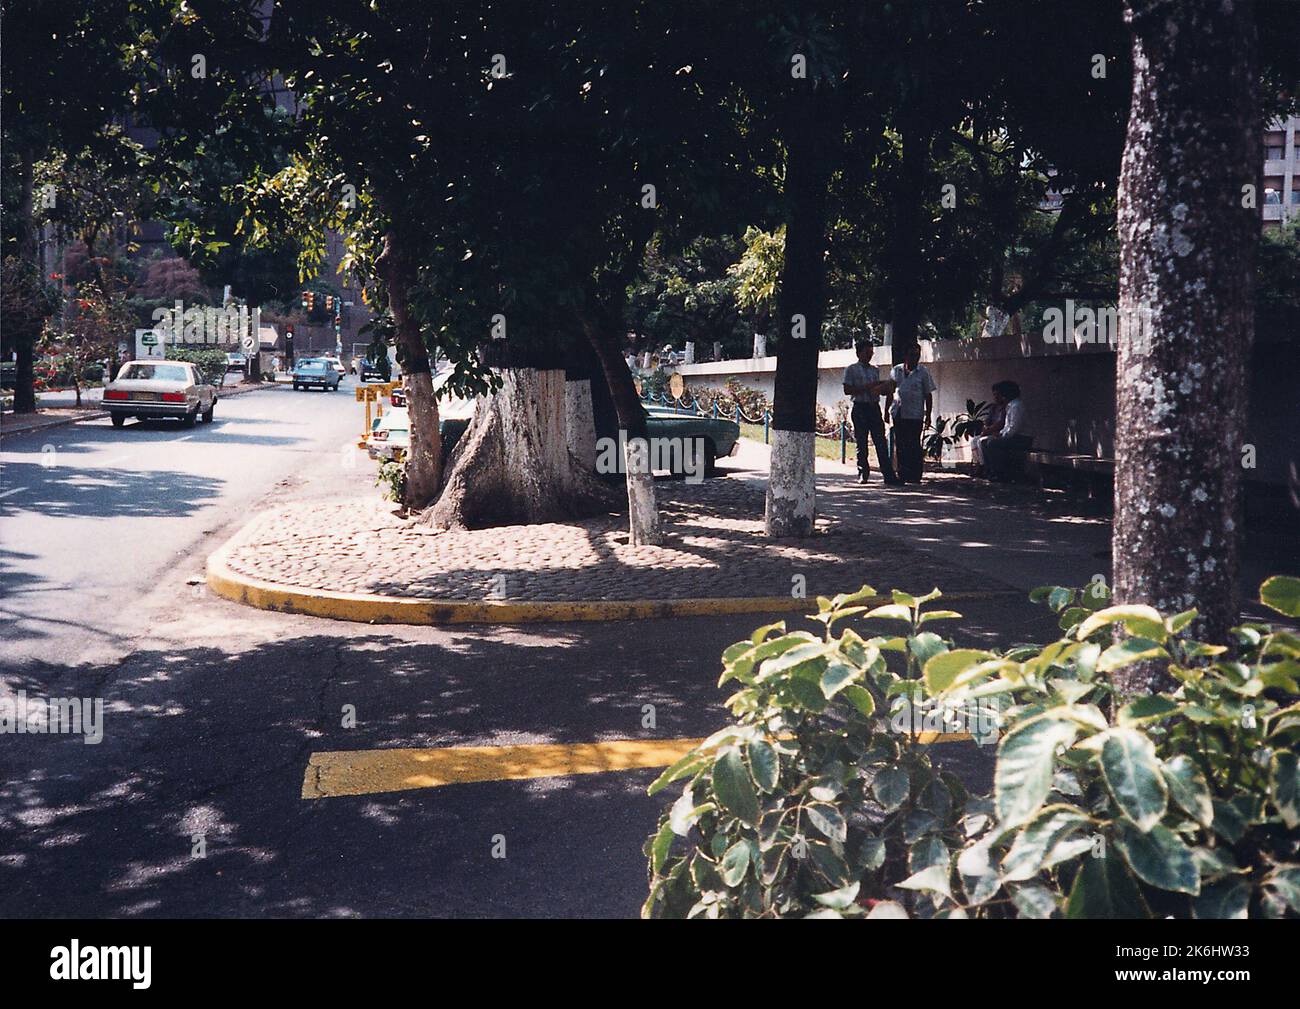 Caracas - Annex Office Building - 1988, United States photographs Related to Embassies, Consulates, and Other Overseas Buildings Stock Photo